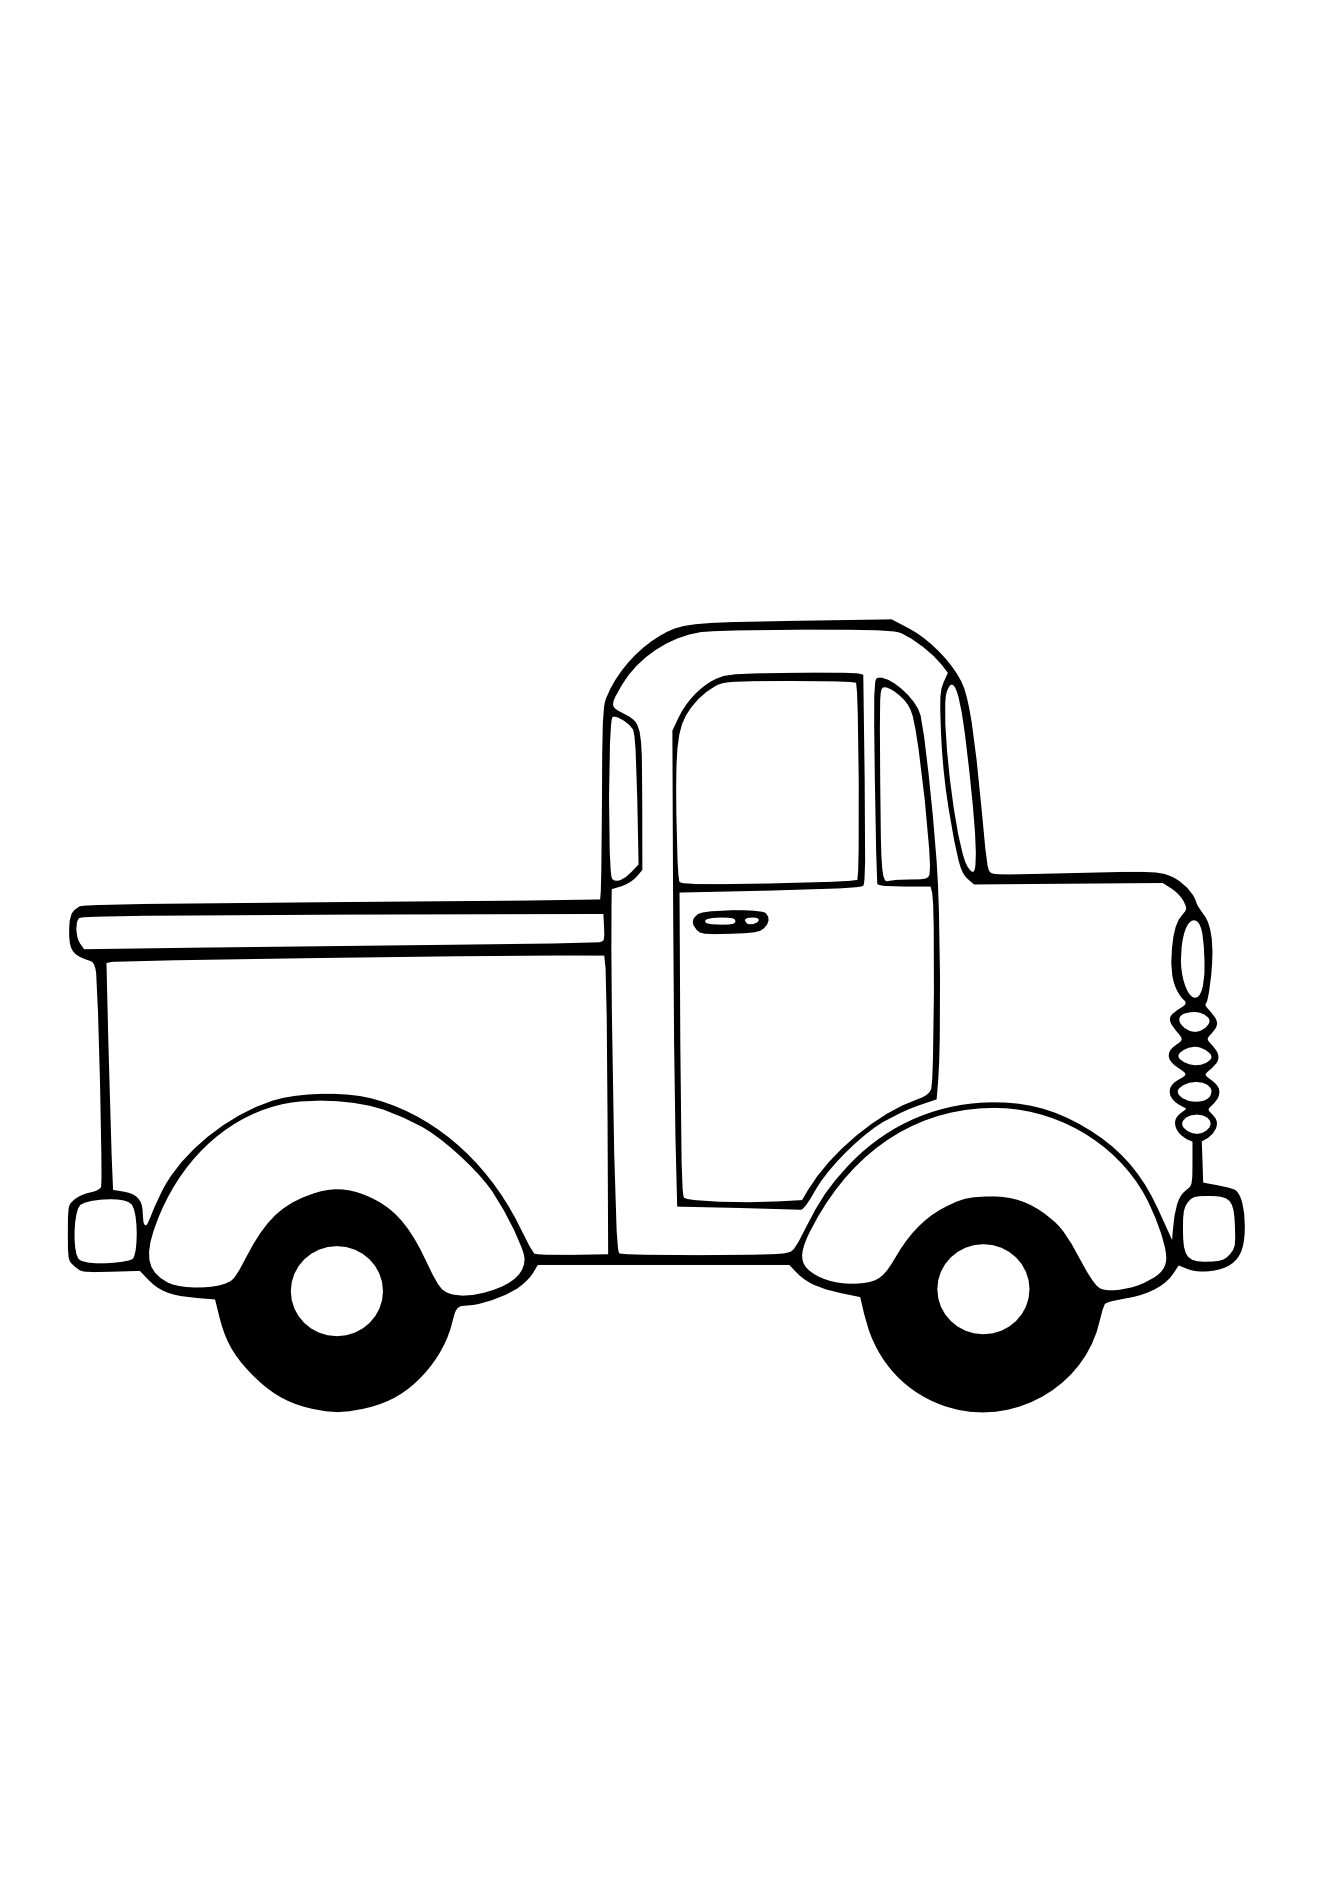 Pick up truck clipart black and white